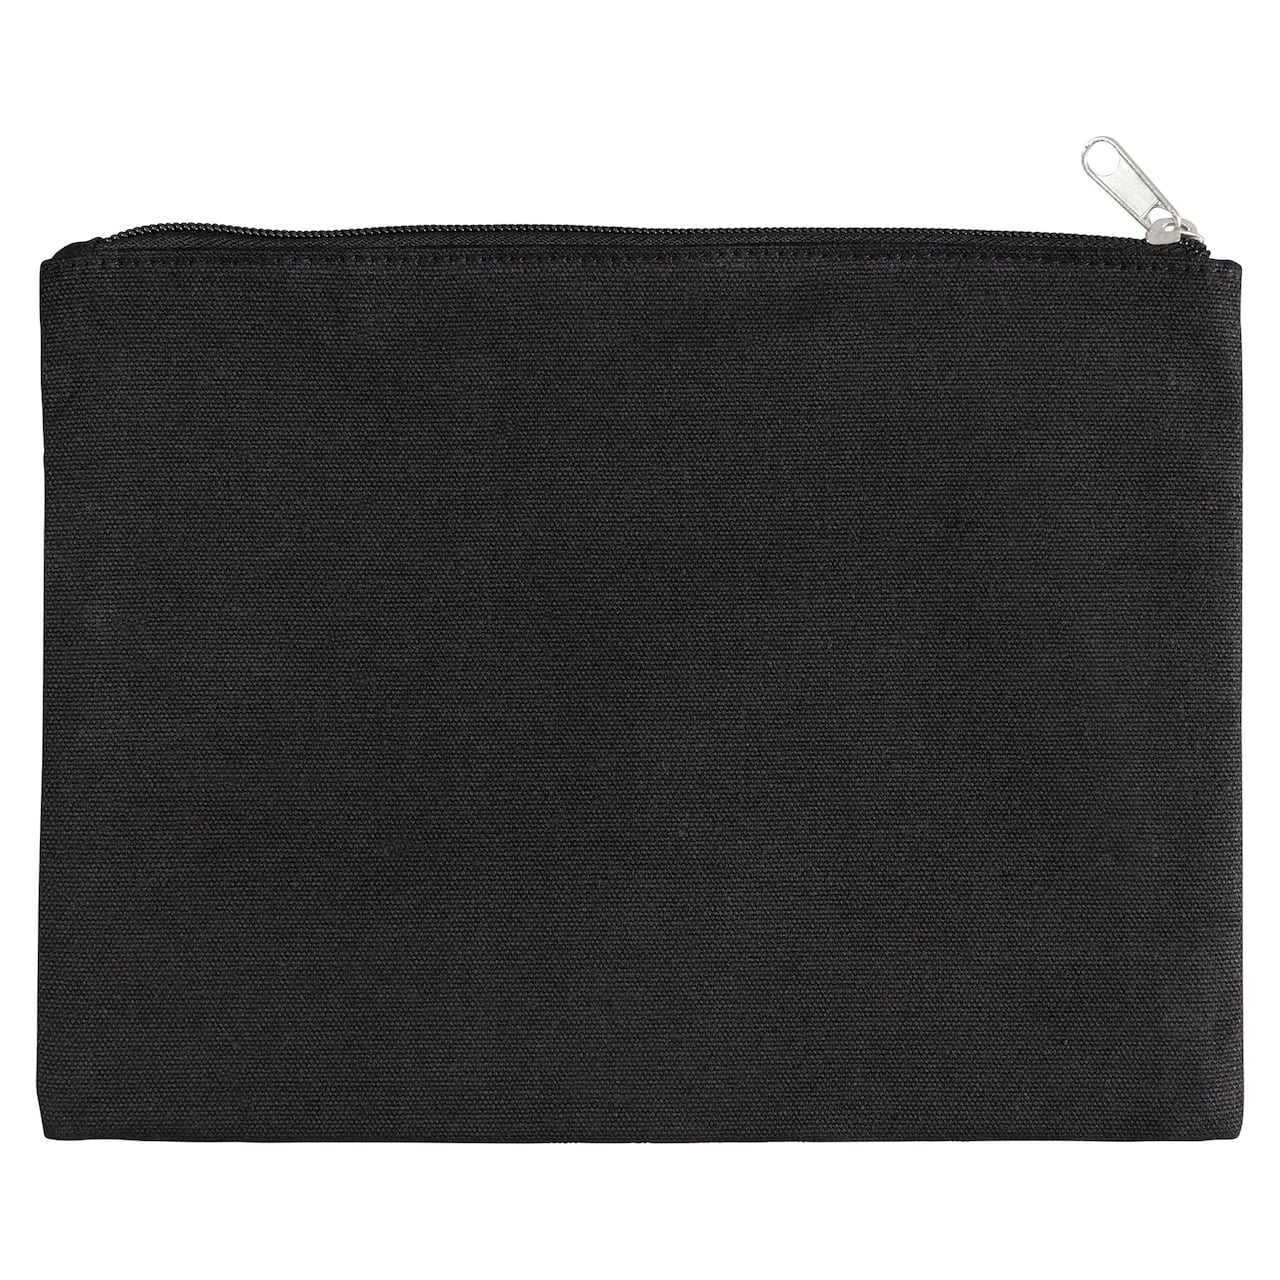 12 Pack: Black Canvas Pouch by Make Market®